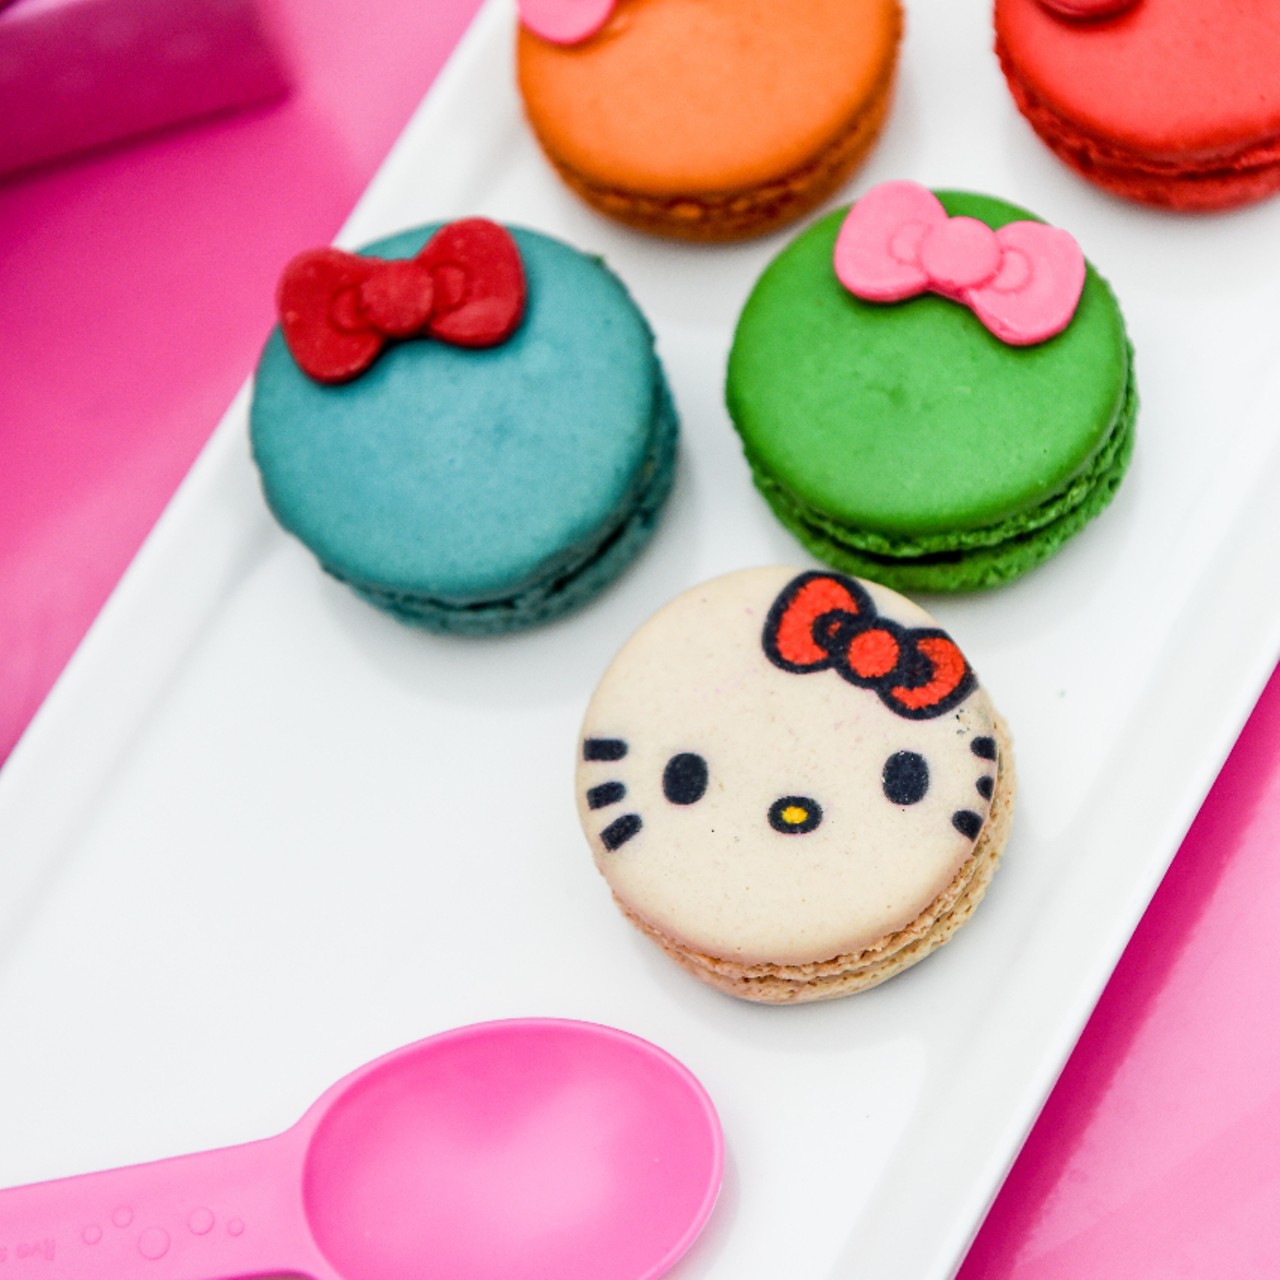 The Hello Kitty Cafe Truck Is Returning to St. Louis This Weekend [PHOTOS]